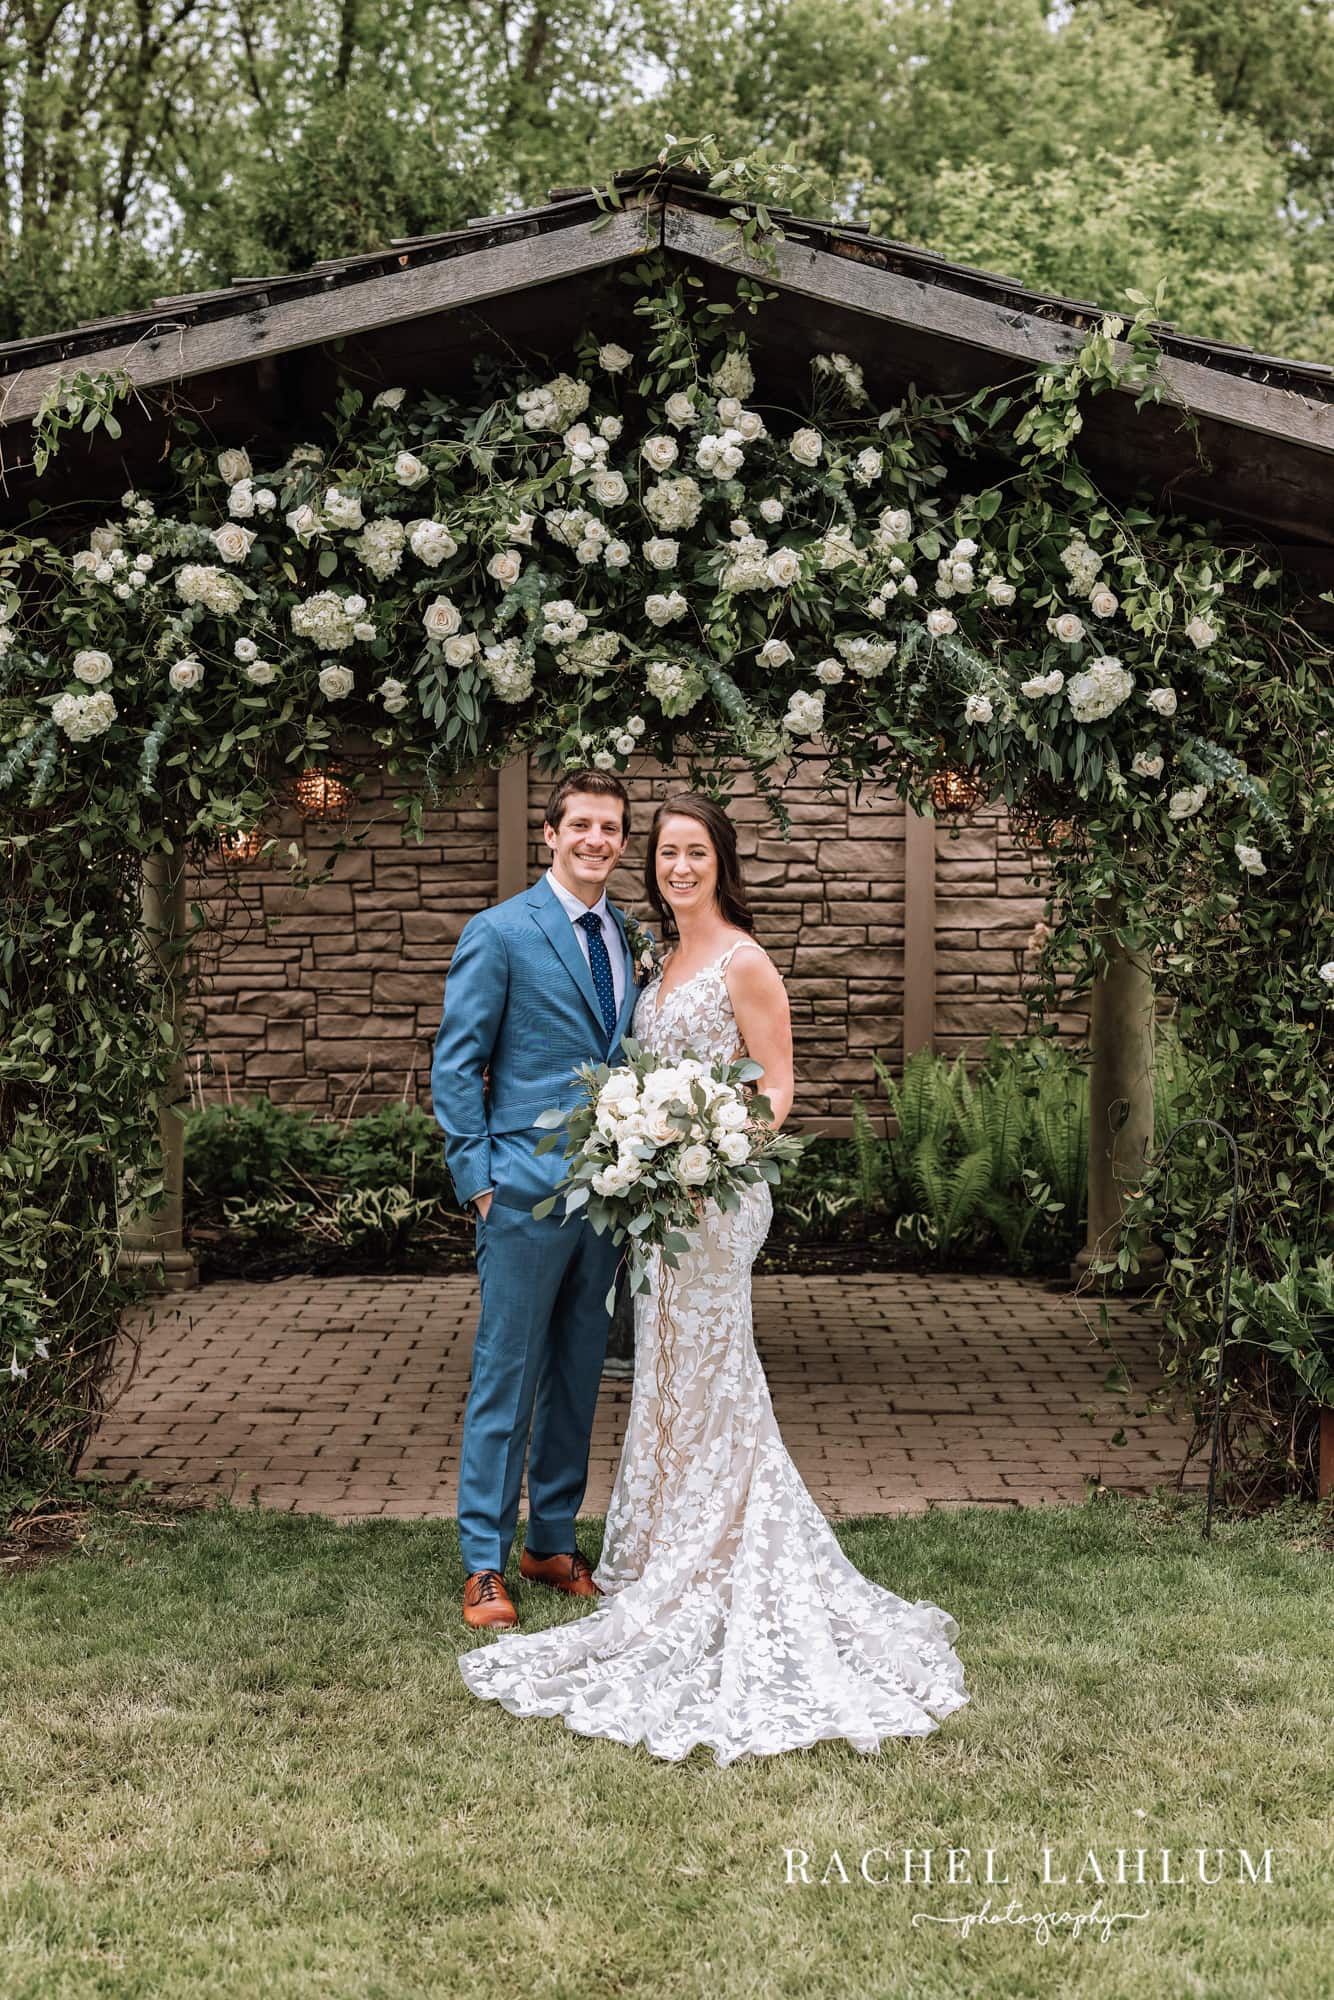 Newly wed couple pose under a floral archway before wedding at Camrose Hill Flower Farm in Stillwater, Minnesota.